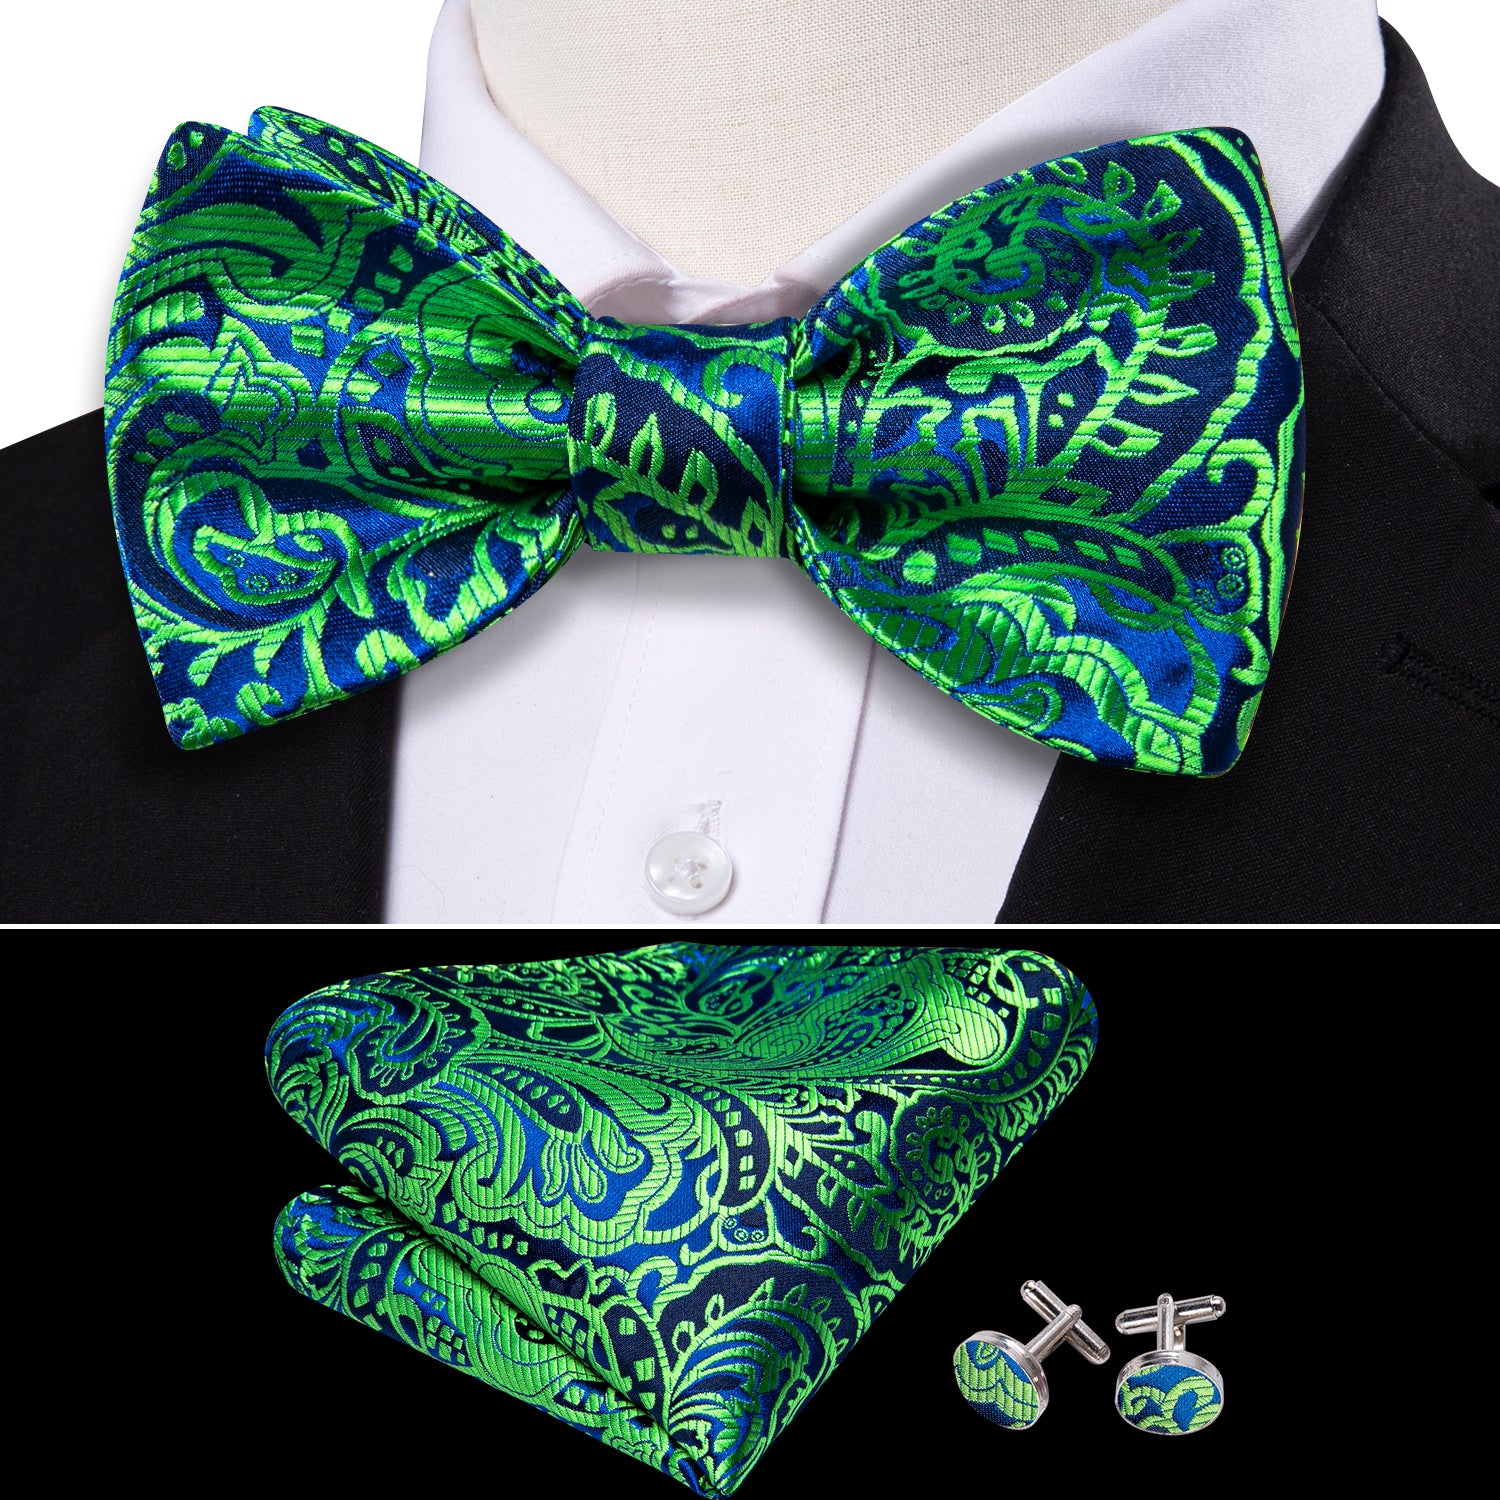 Barry.wang Floral Tie Green Navy Paisley Bow Tie Hanky Cufflinks Set